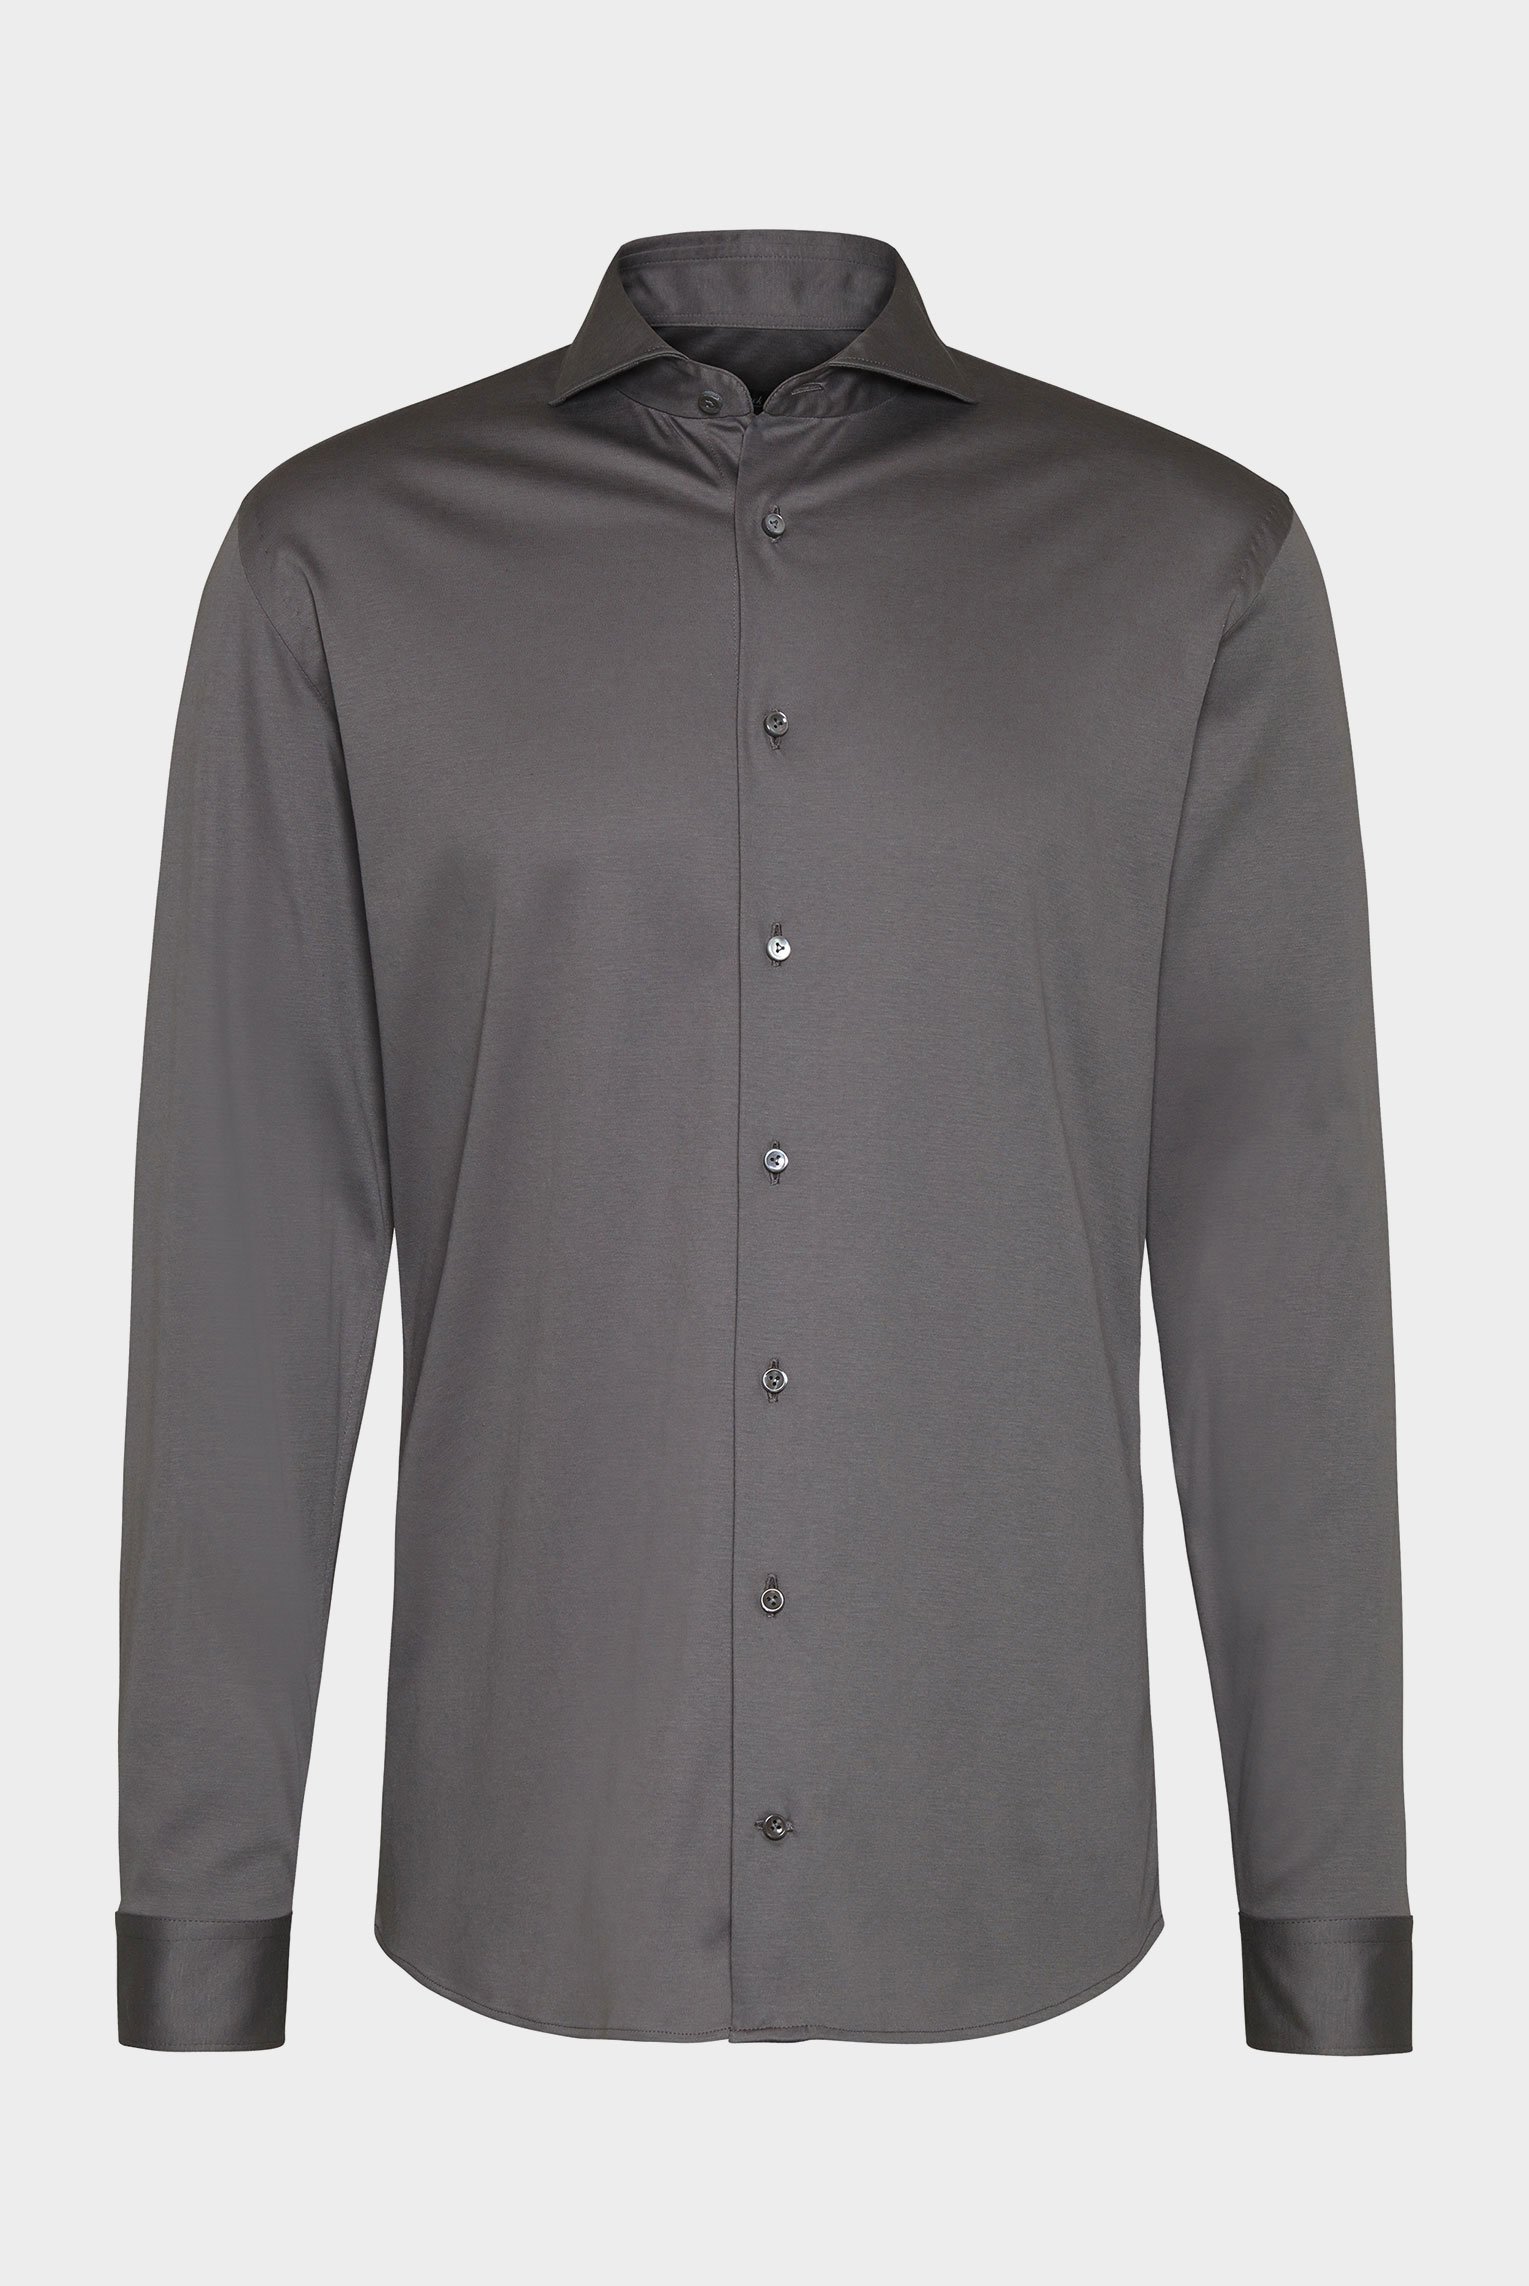 Casual Shirts+Jersey Shirt Swiss Cotton Tailor Fit+20.1683.UC.180031.070.S